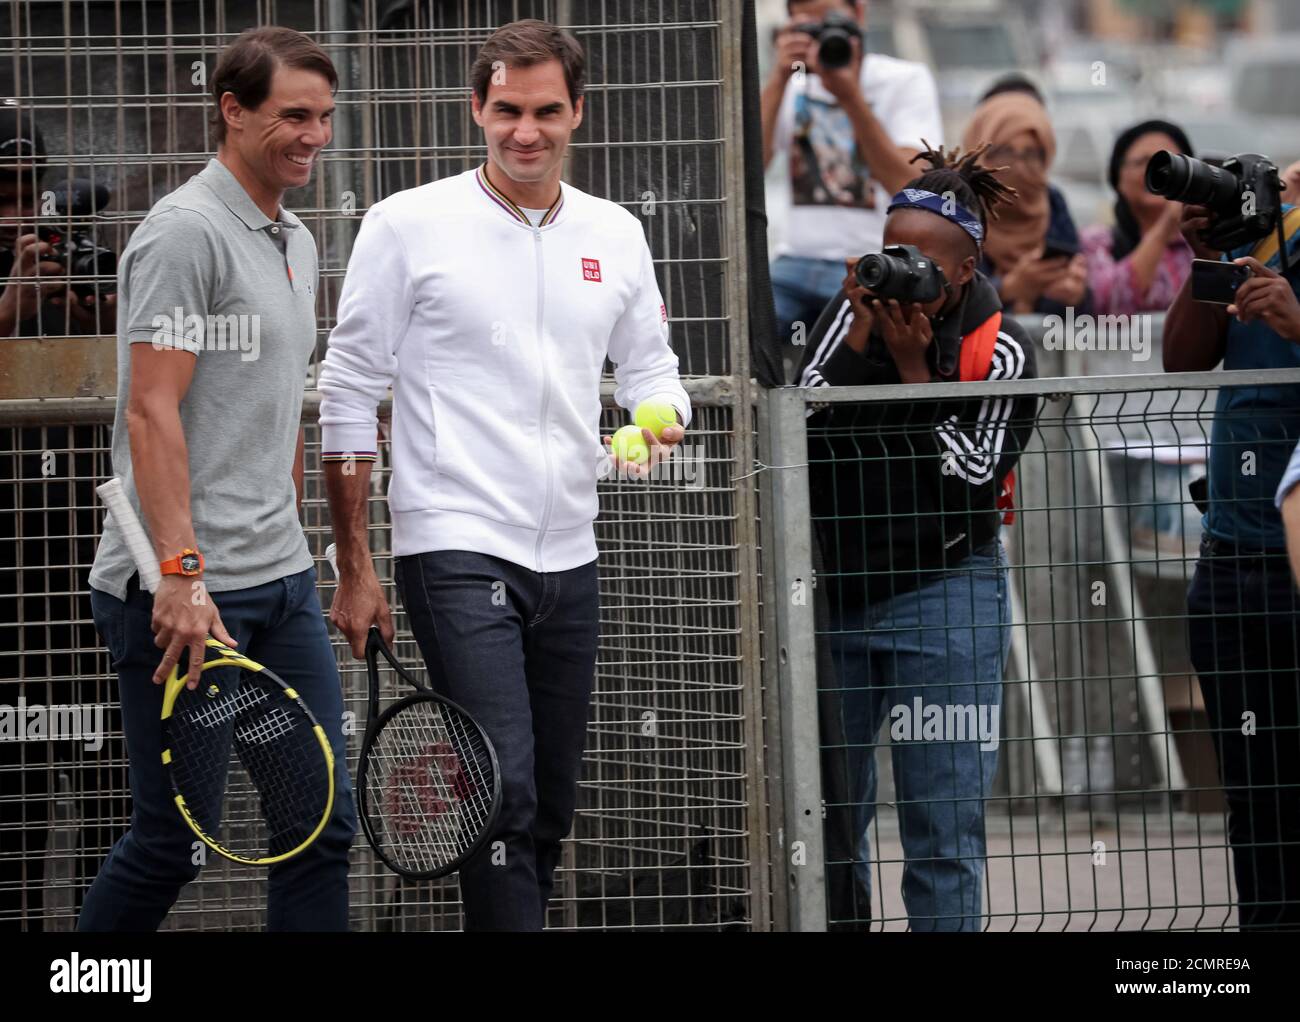 Roger Federer and Rafael Nadal arrive for a photo session ahead of their  "Match in Africa" exhibition tennis match in Cape Town, South Africa,  February 7, 2020. REUTERS/Mike Hutchings Stock Photo - Alamy